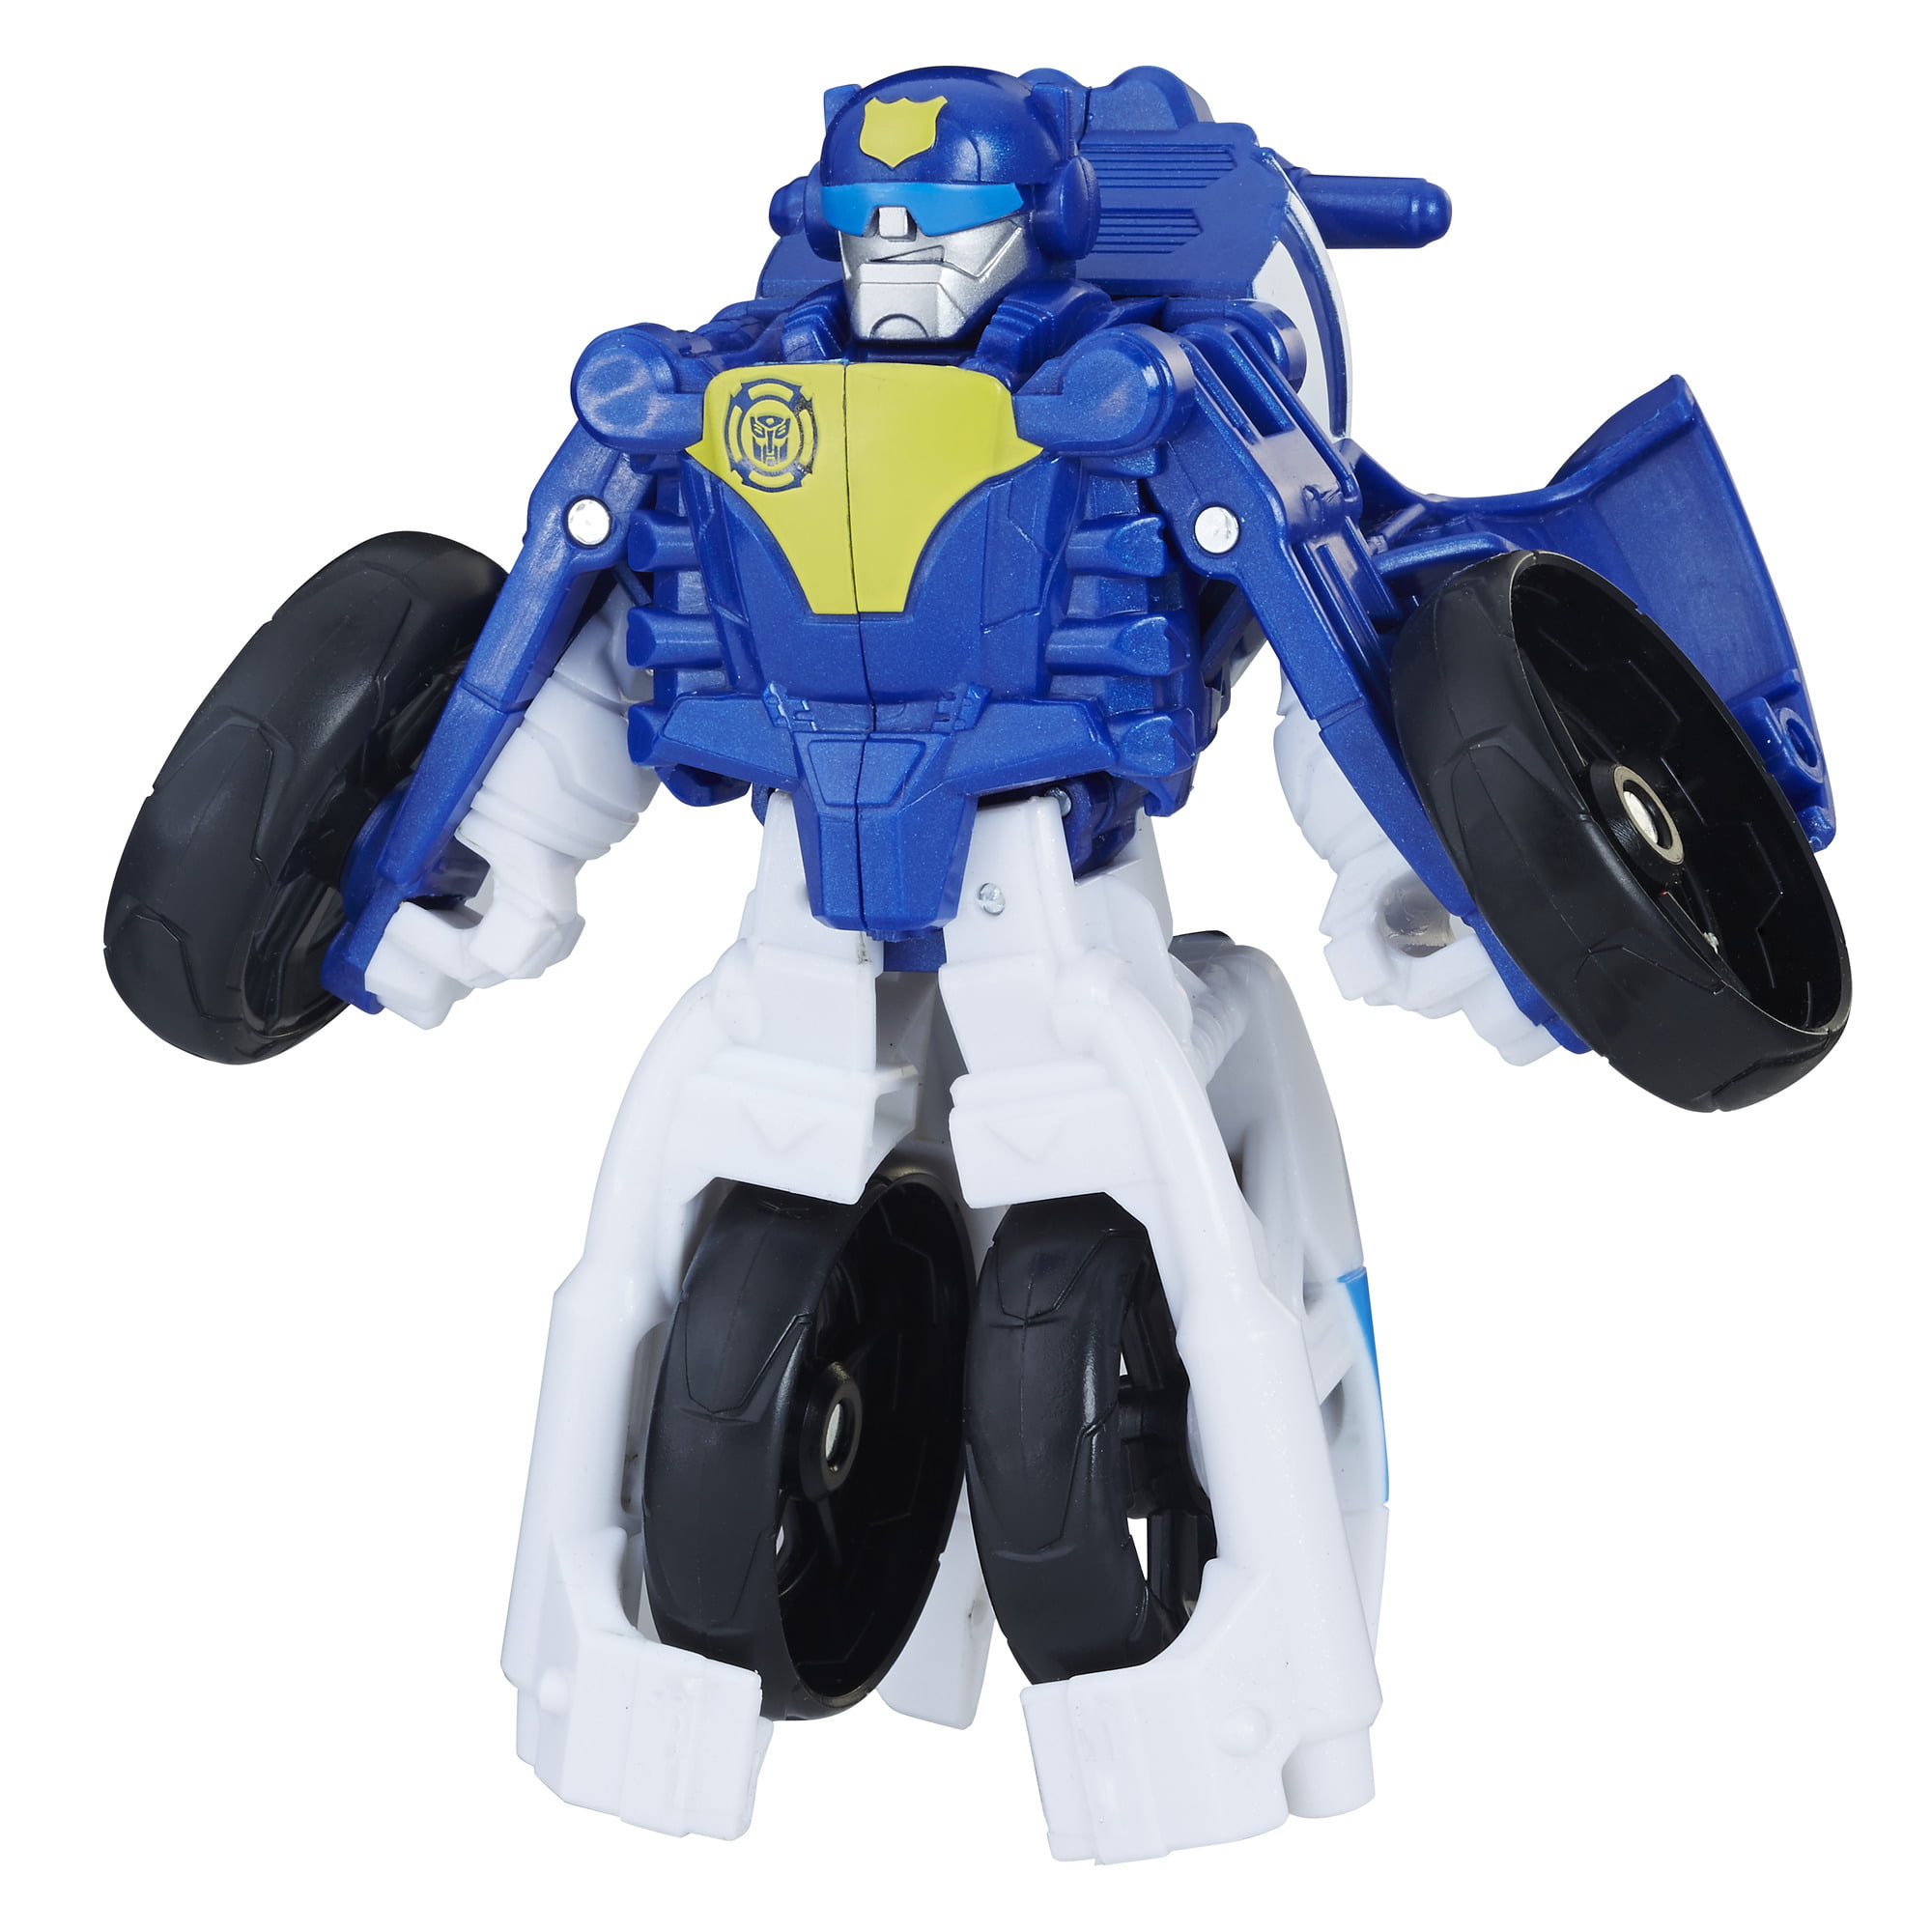 Playskool Heroes Transformers Rescue Bots Rescan Brushfire Action Figure chase 